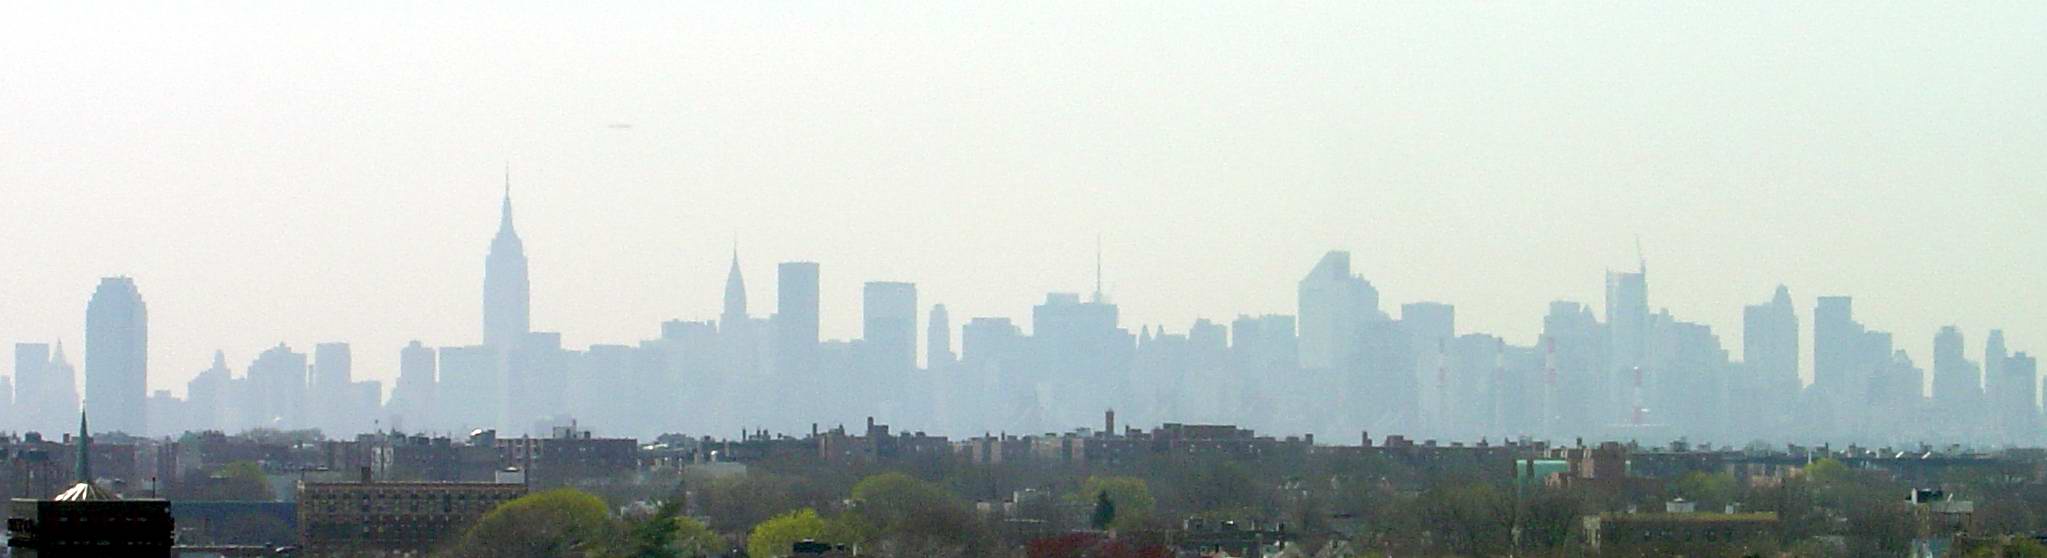 Manhattan's skyline as seen from the distance of the Shea Stadium (about 8 miles away)